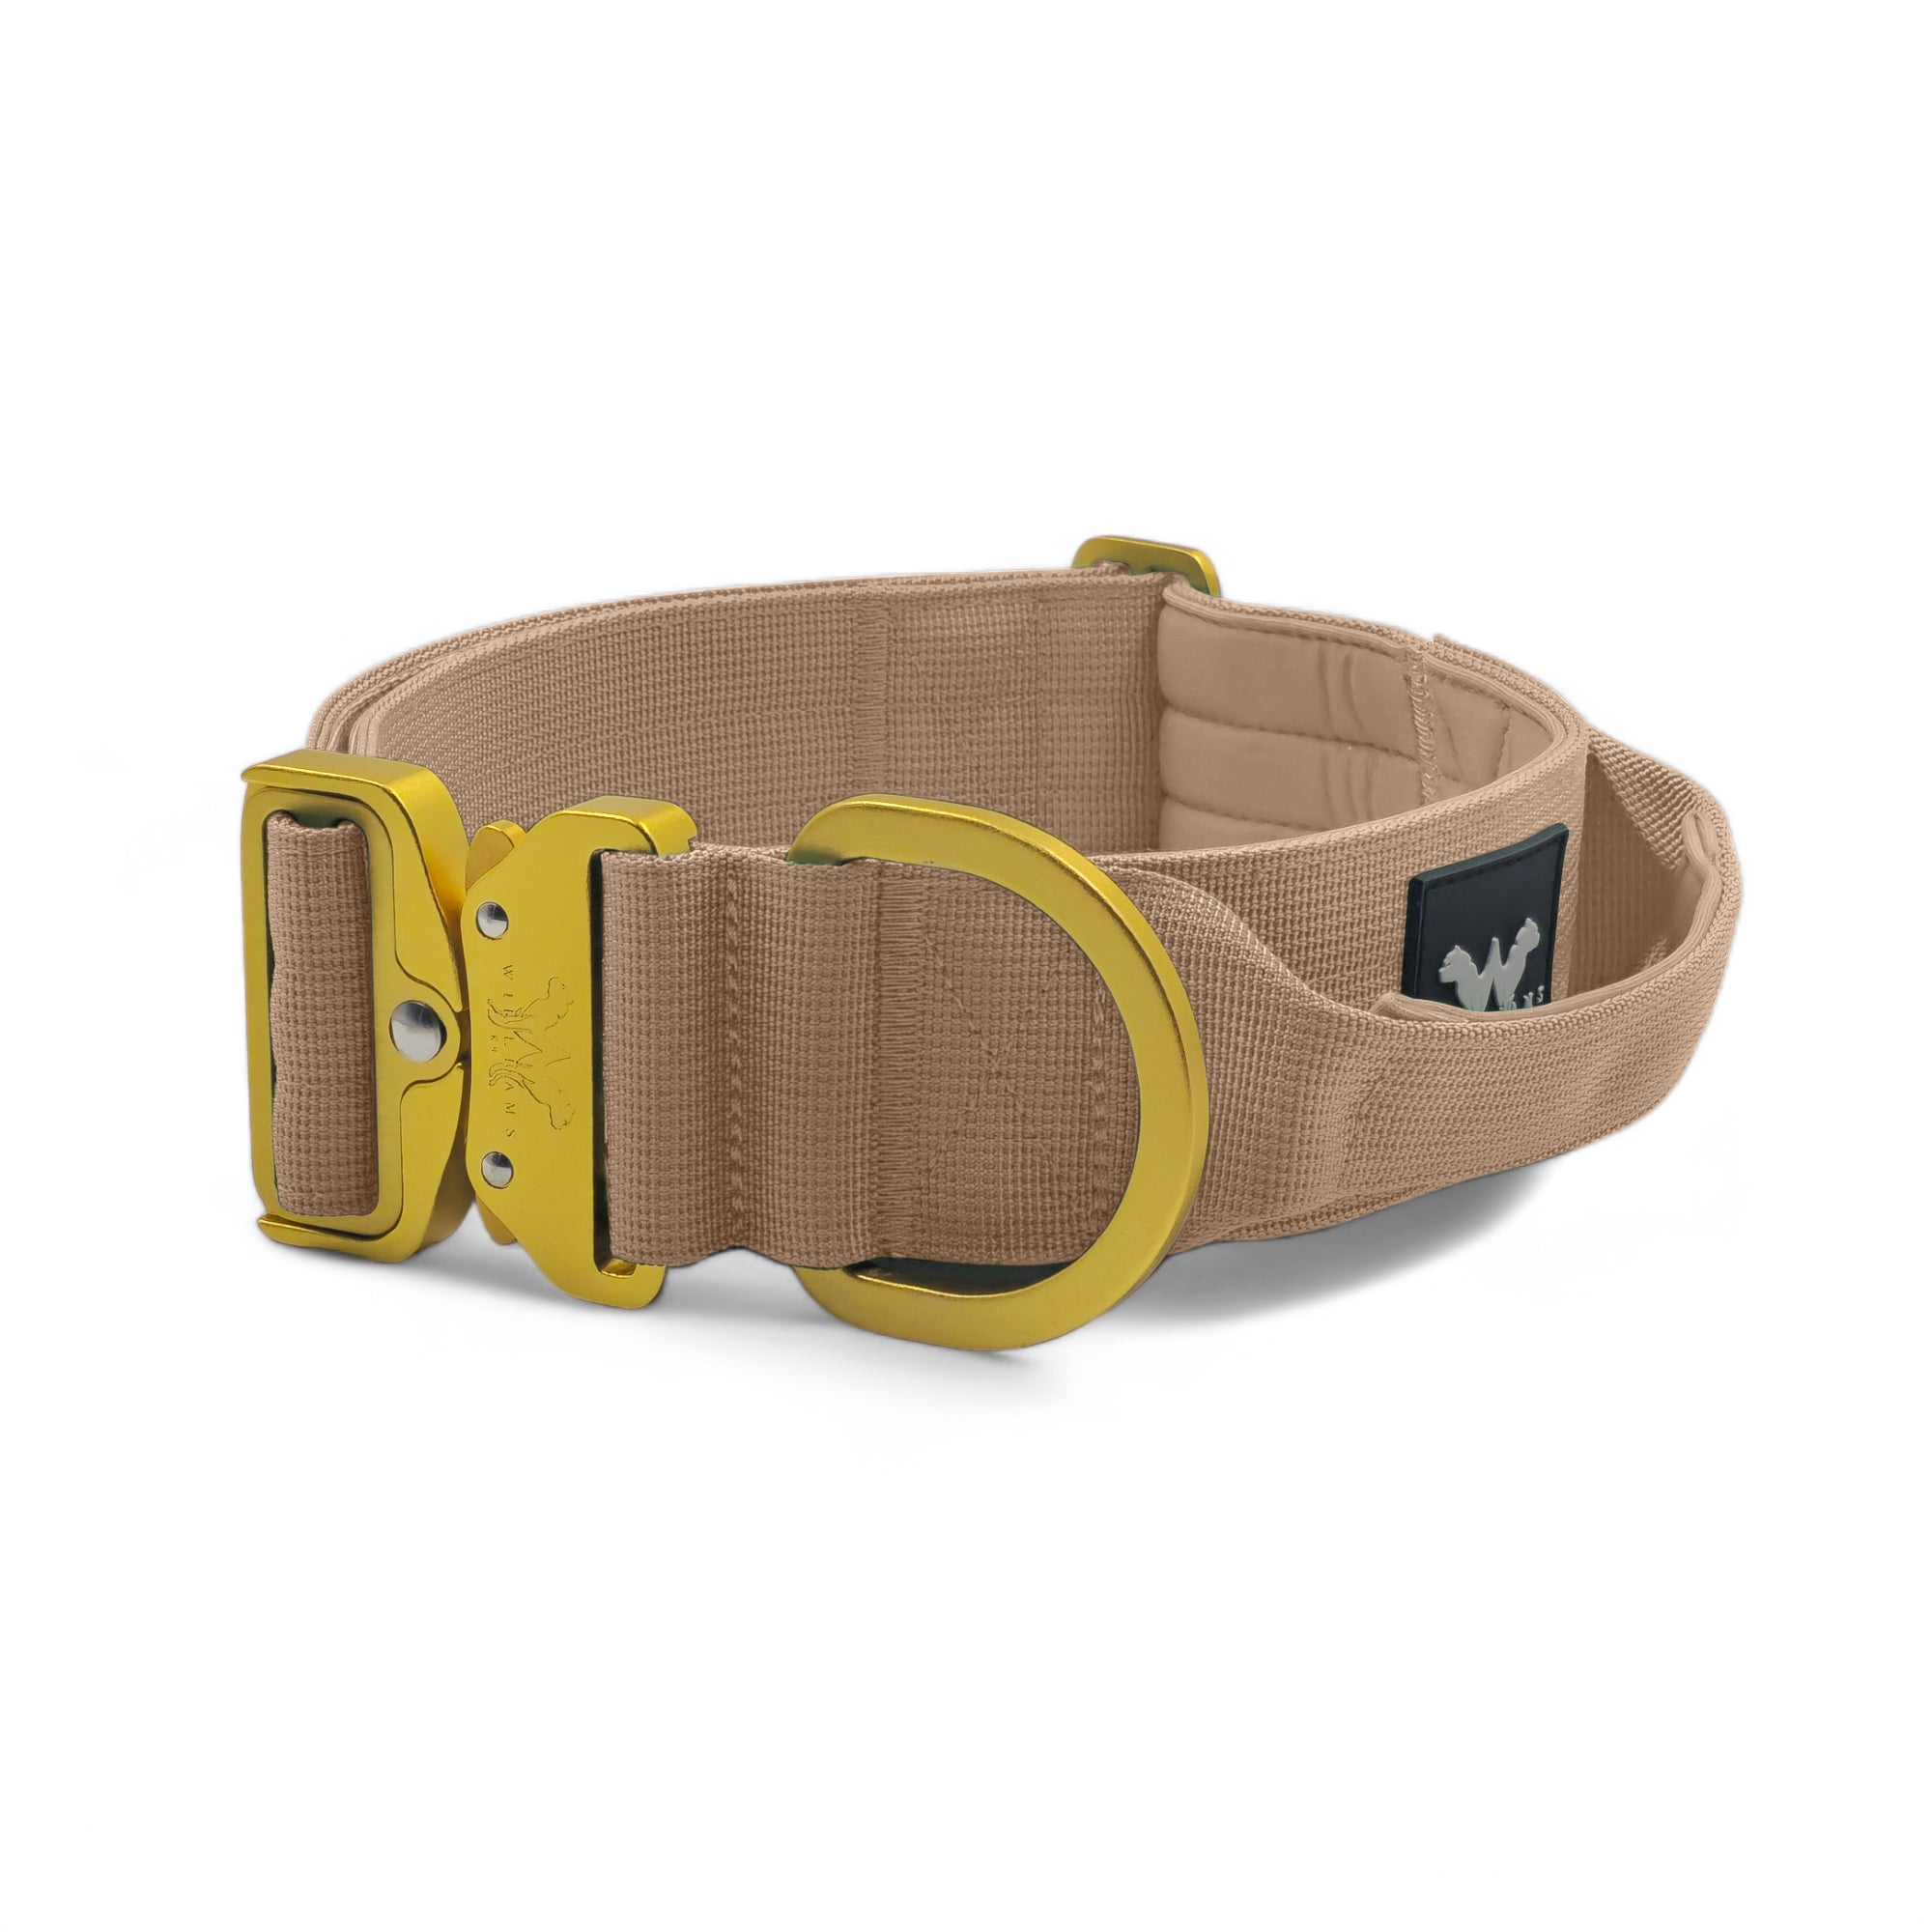 Light Tactical Collar 5CM Military Tan | Quad Stitched Nylon Lightweight Gold Aluminium Buckle + D Ring Adjustable Collar With Handle